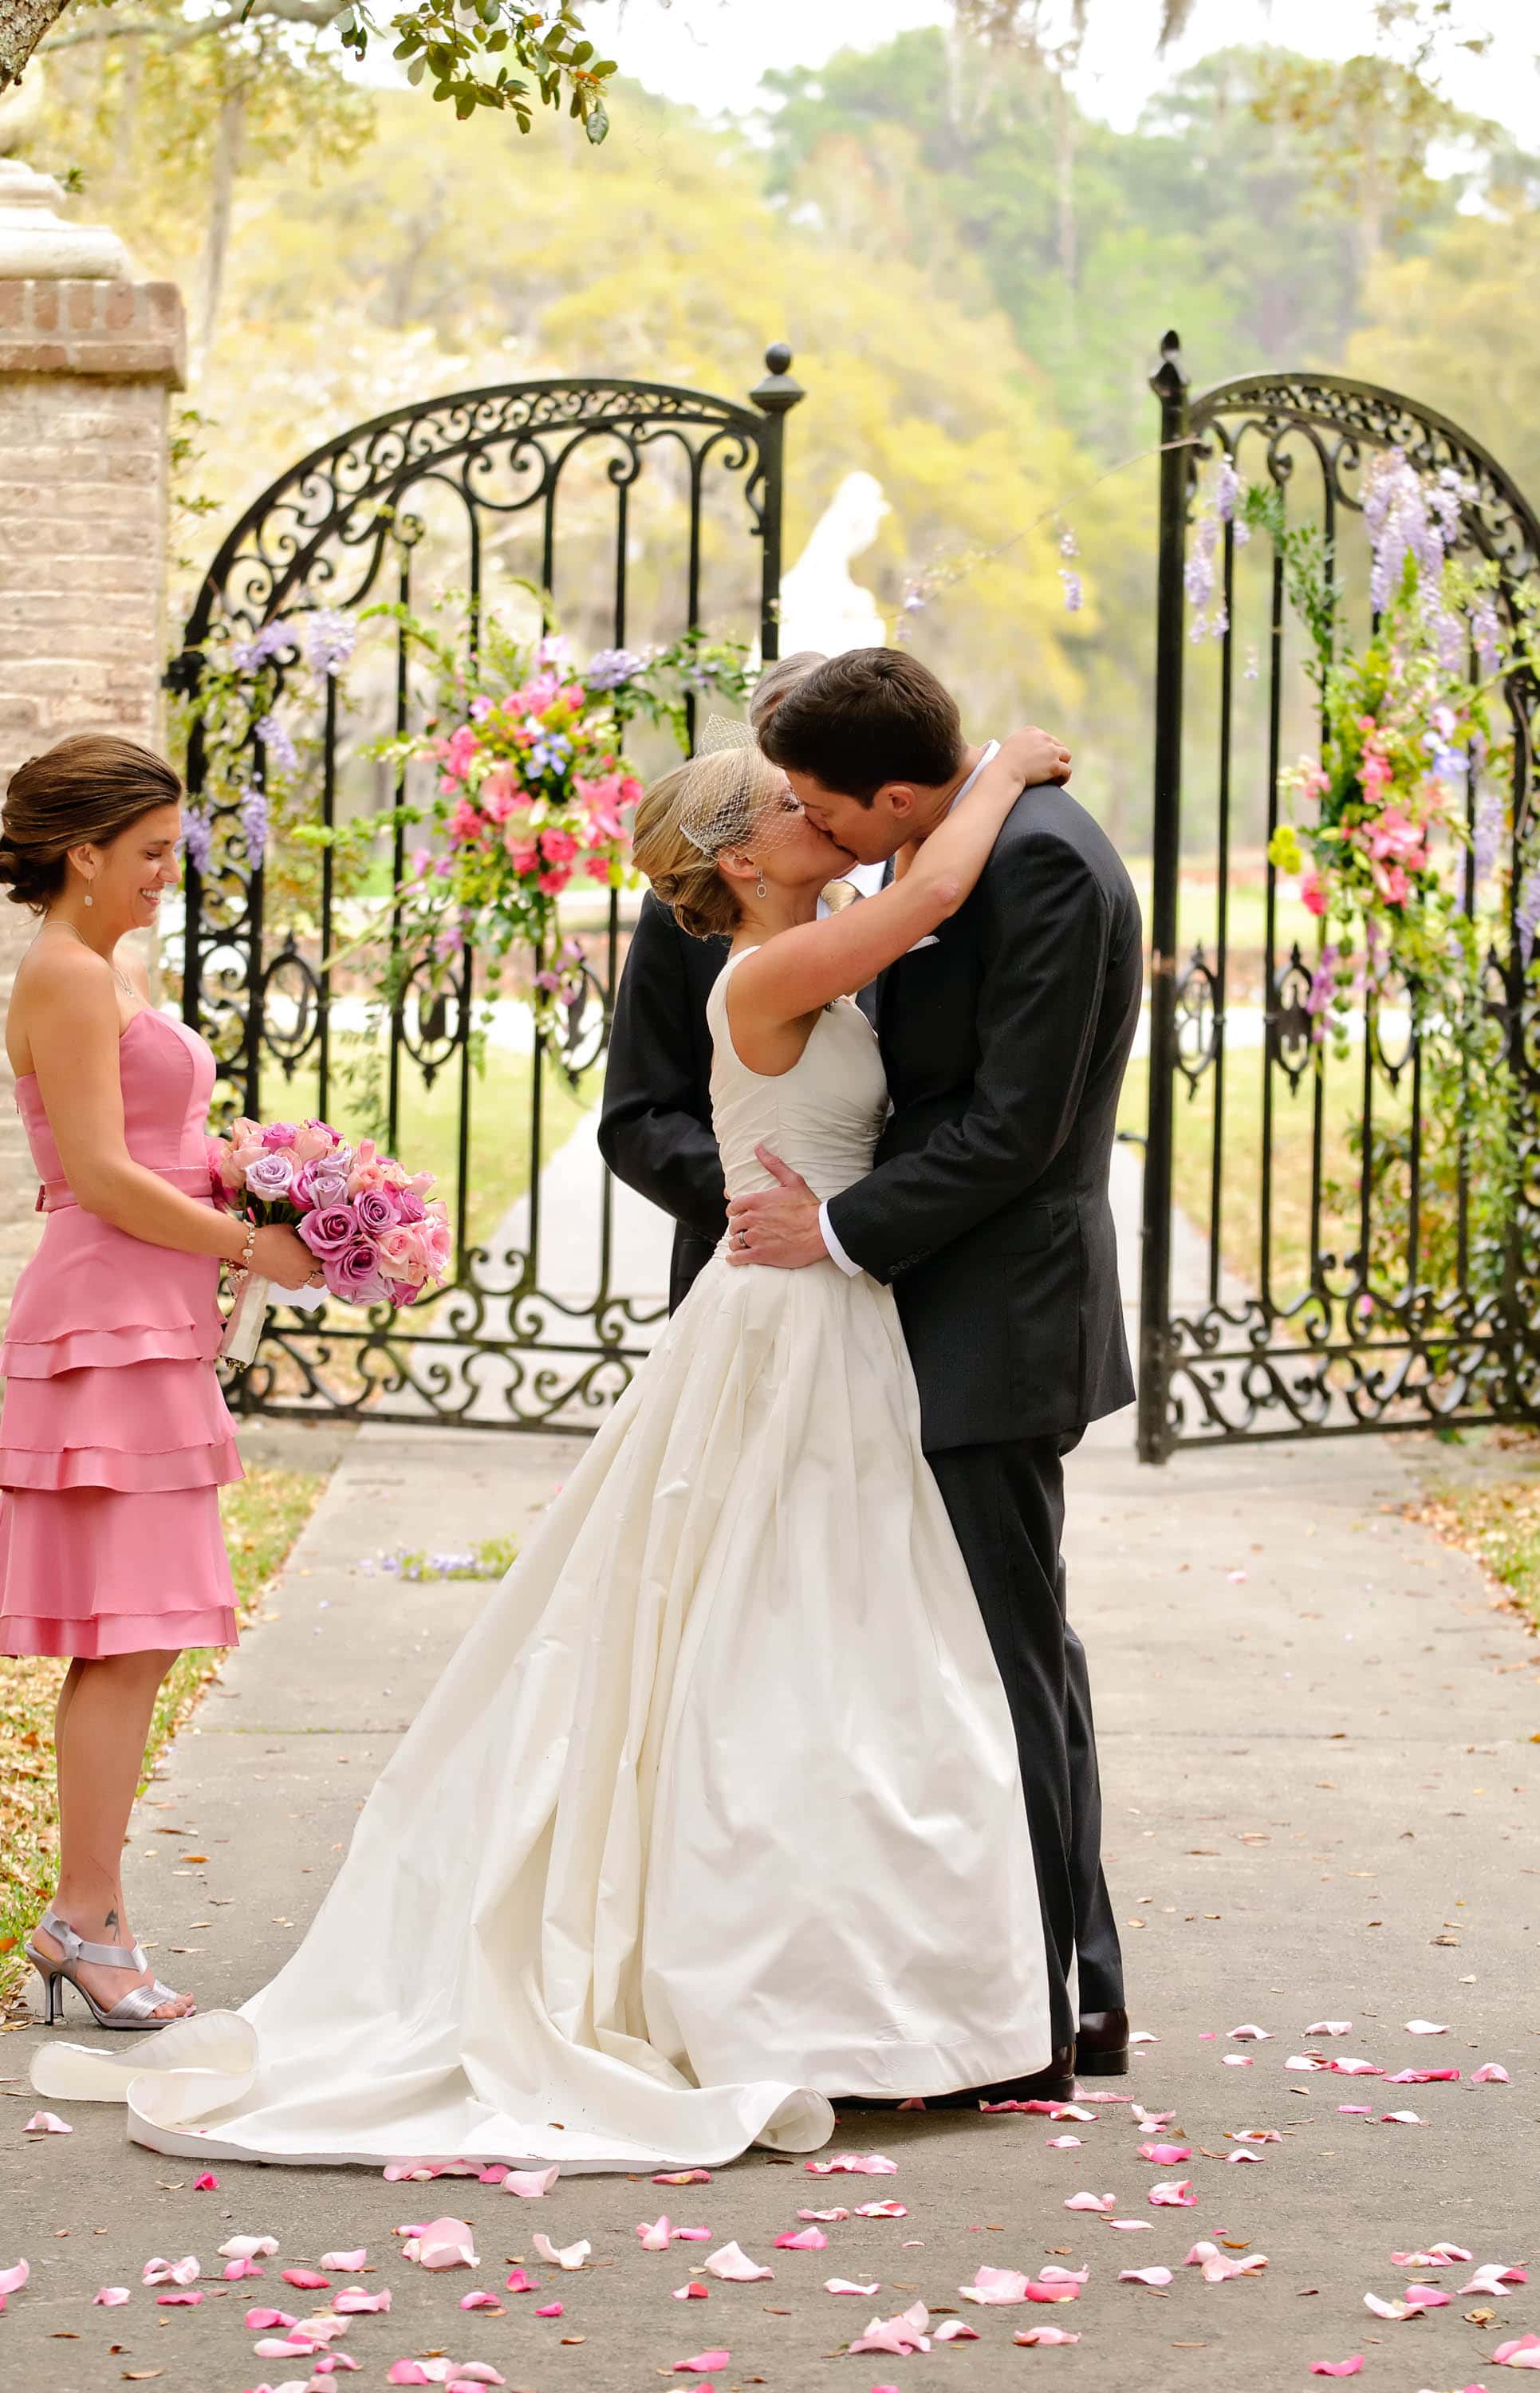 First Kiss in front of the gates